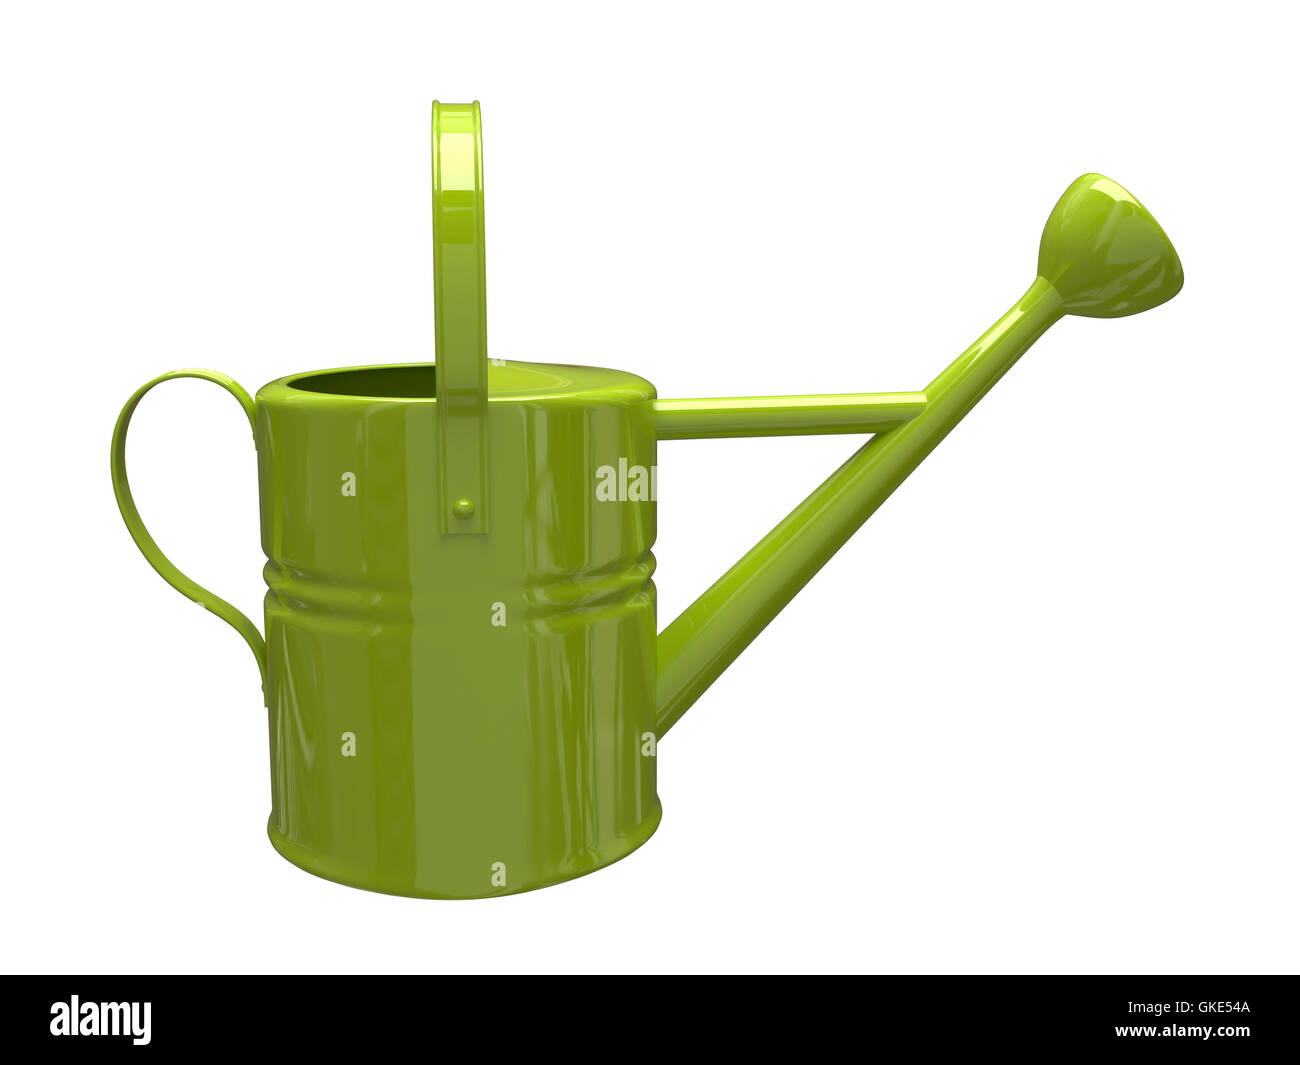 Garden watering can Stock Photo - Alamy